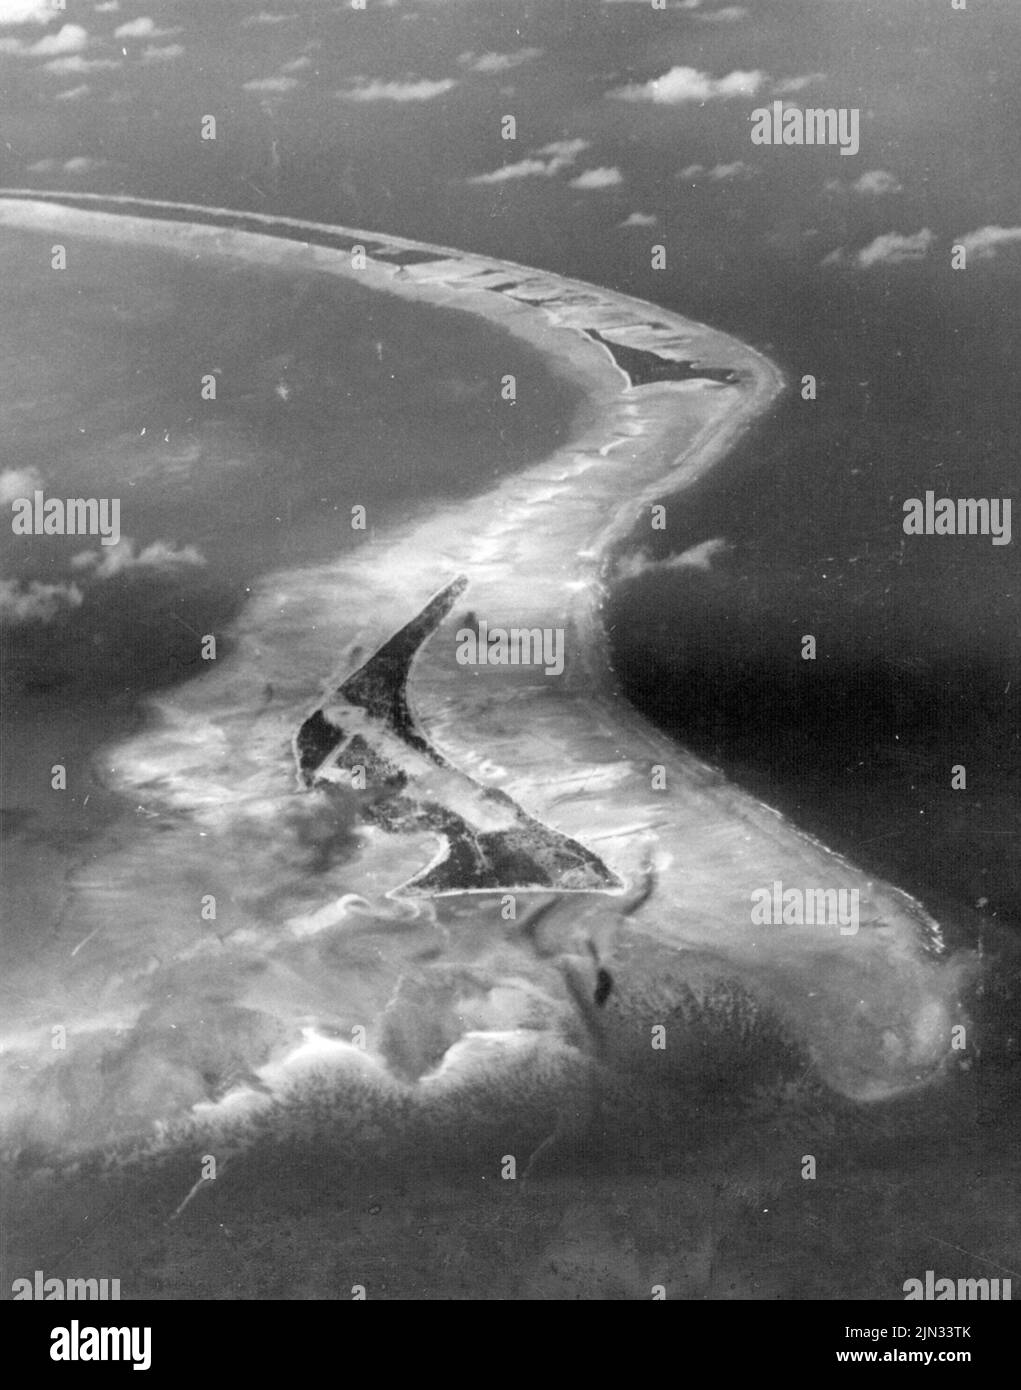 Aerial view of Betio Island, Tarawa Atoll before invasion of the island by U.S. Marines in November 1943. The landings on Tarawa were part of the US offensive against the Pacific Islands held by Japan before preparing for an assault on the Japanese mainland. Stock Photo